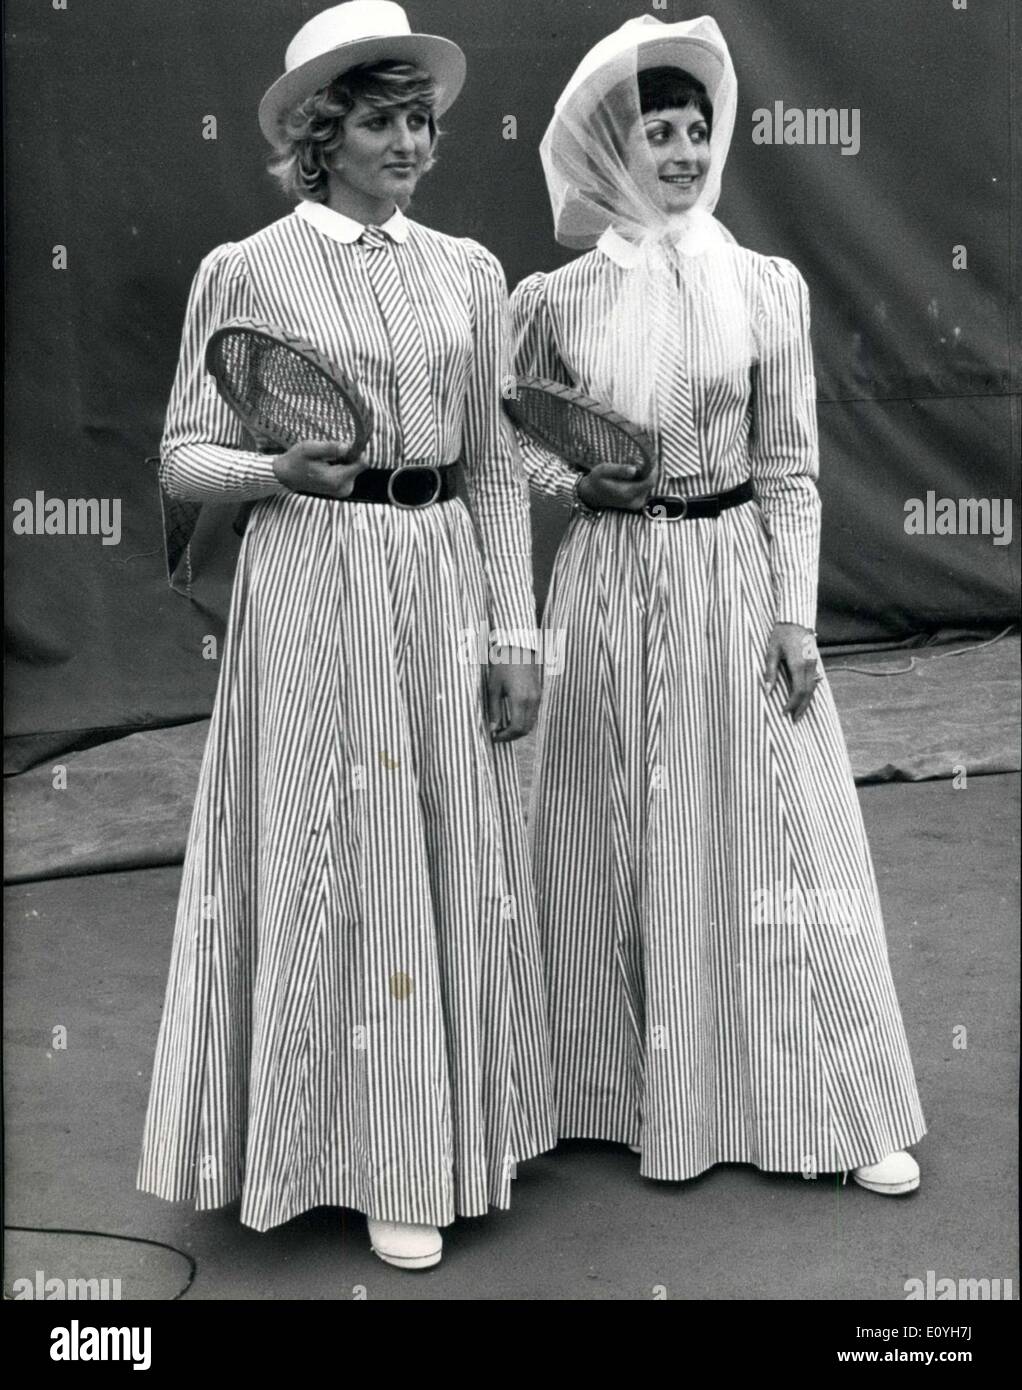 May 30, 1970 - Models in Women's 1900s Tennis Outfits at French Open Stock  Photo - Alamy